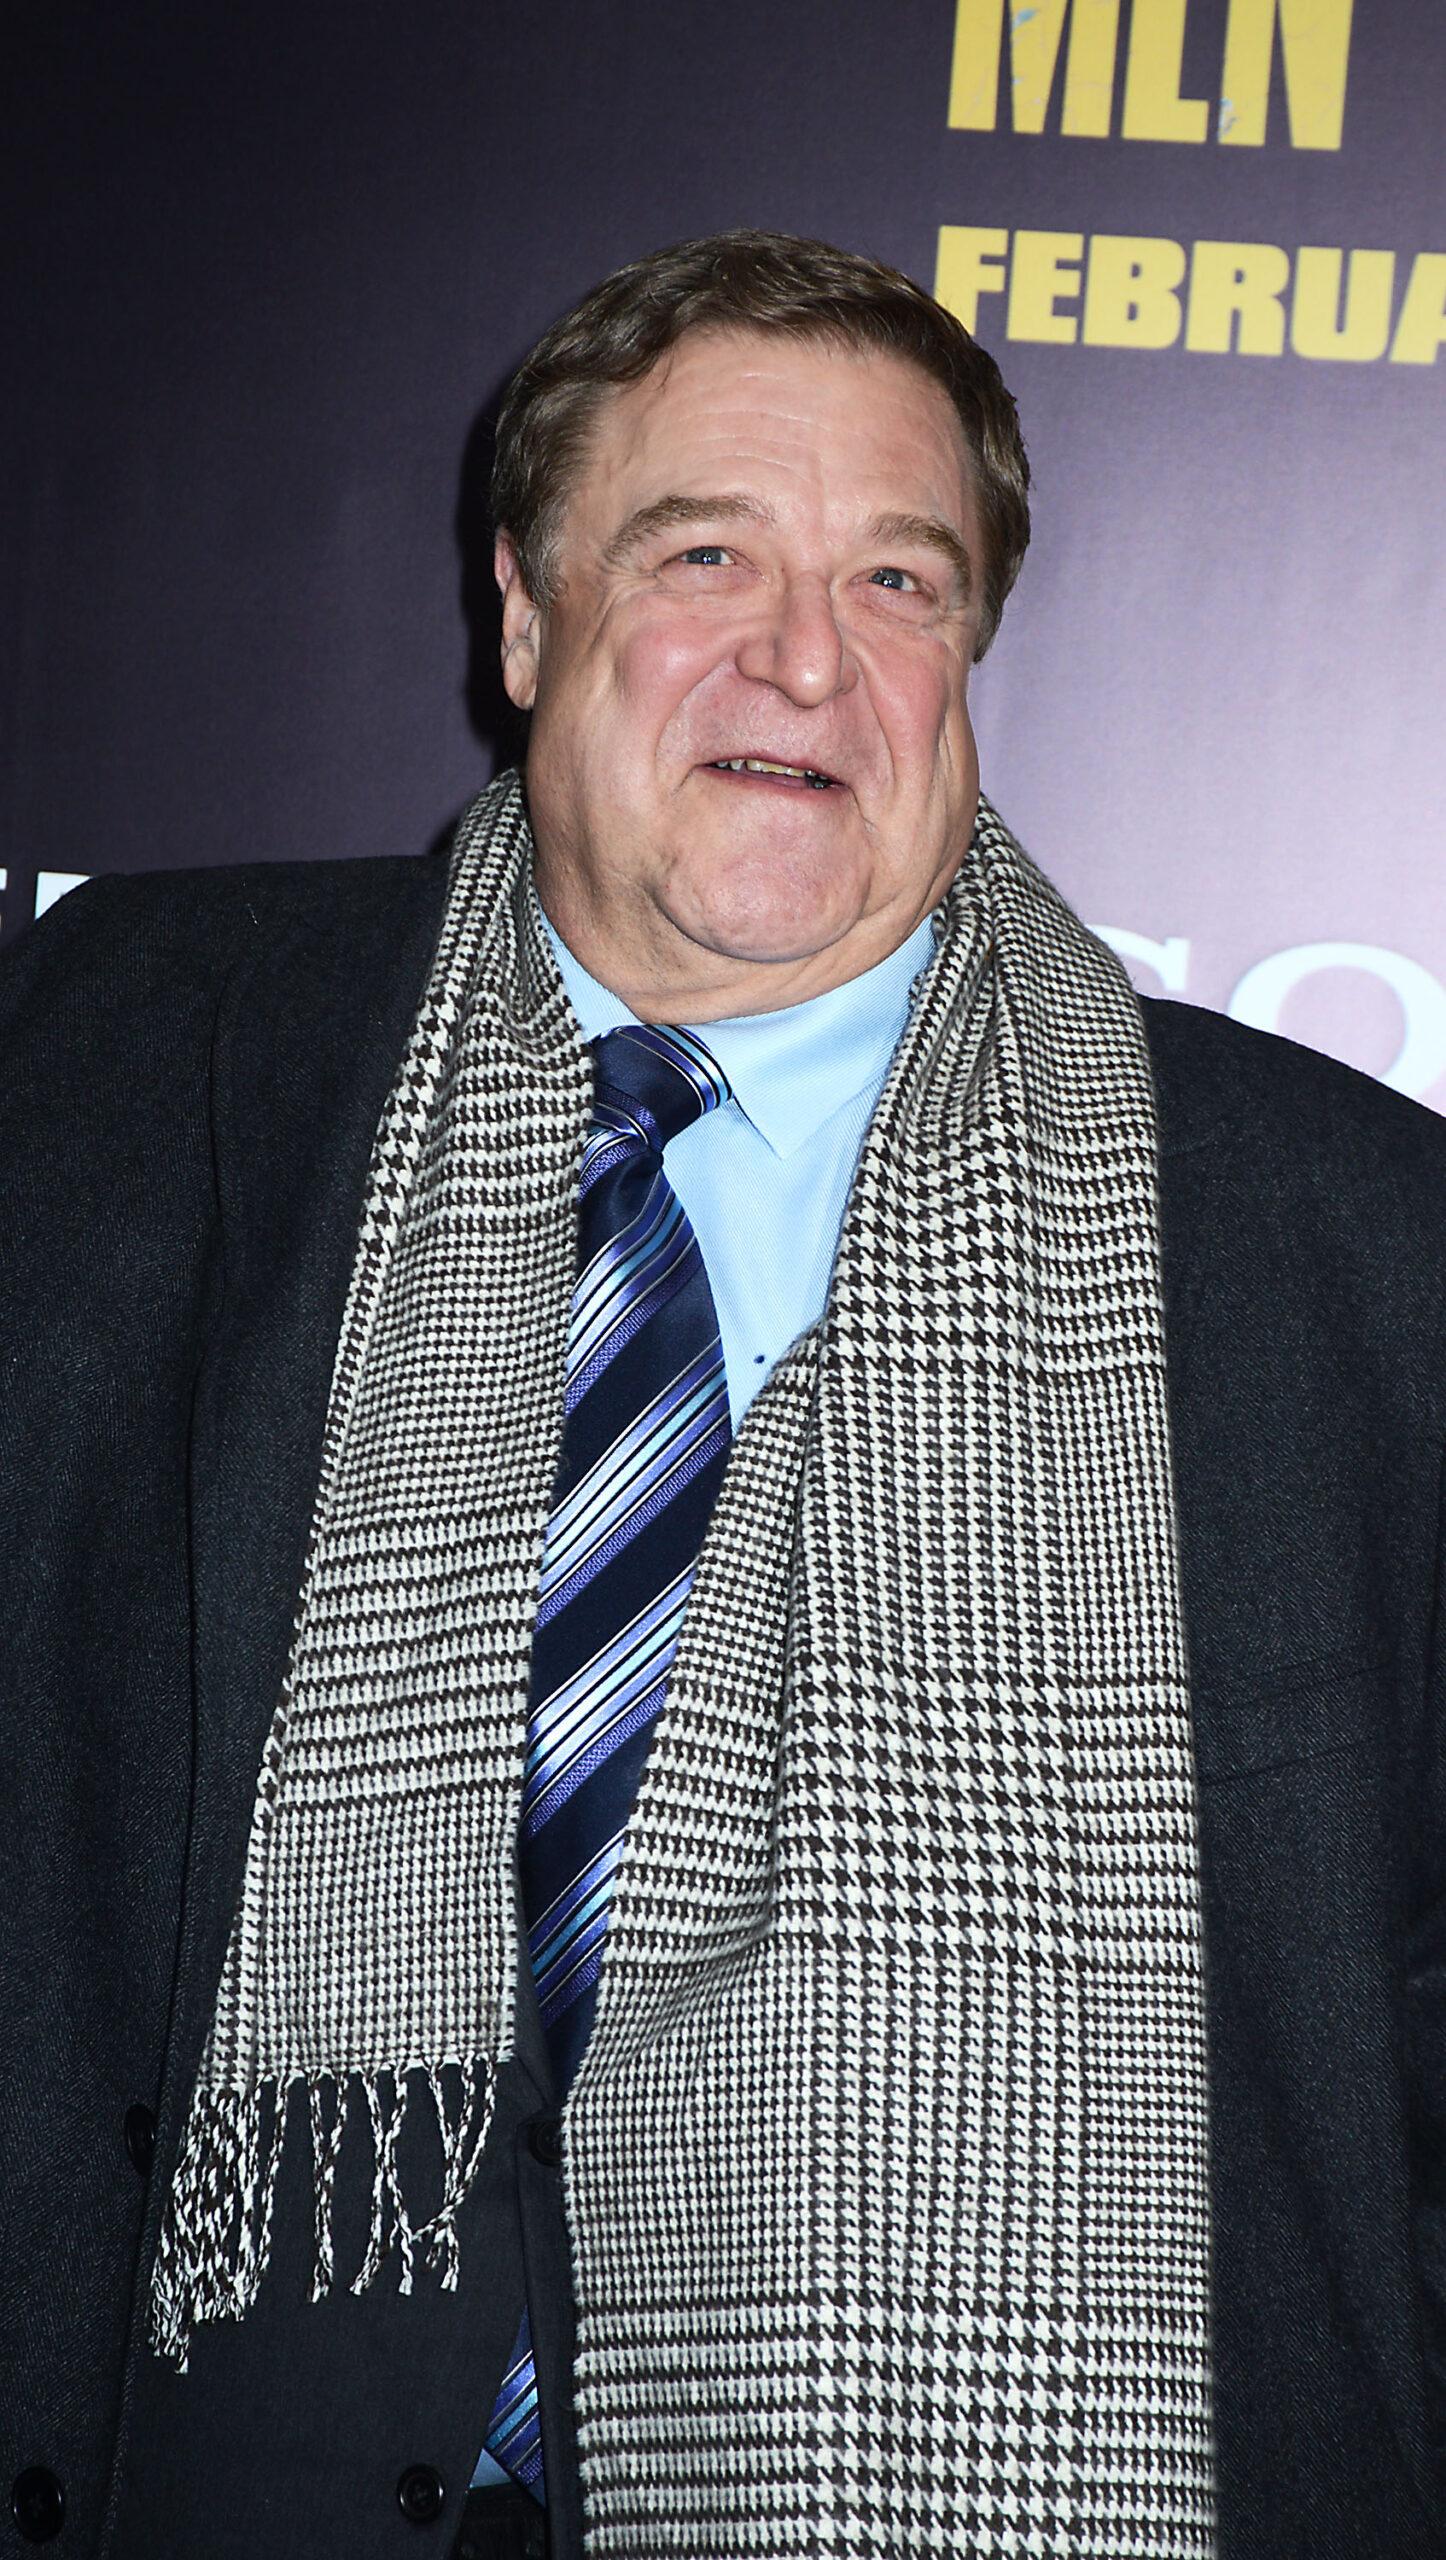 John Goodman Flaunts His 200-POUND Weight Loss On The Red Carpet